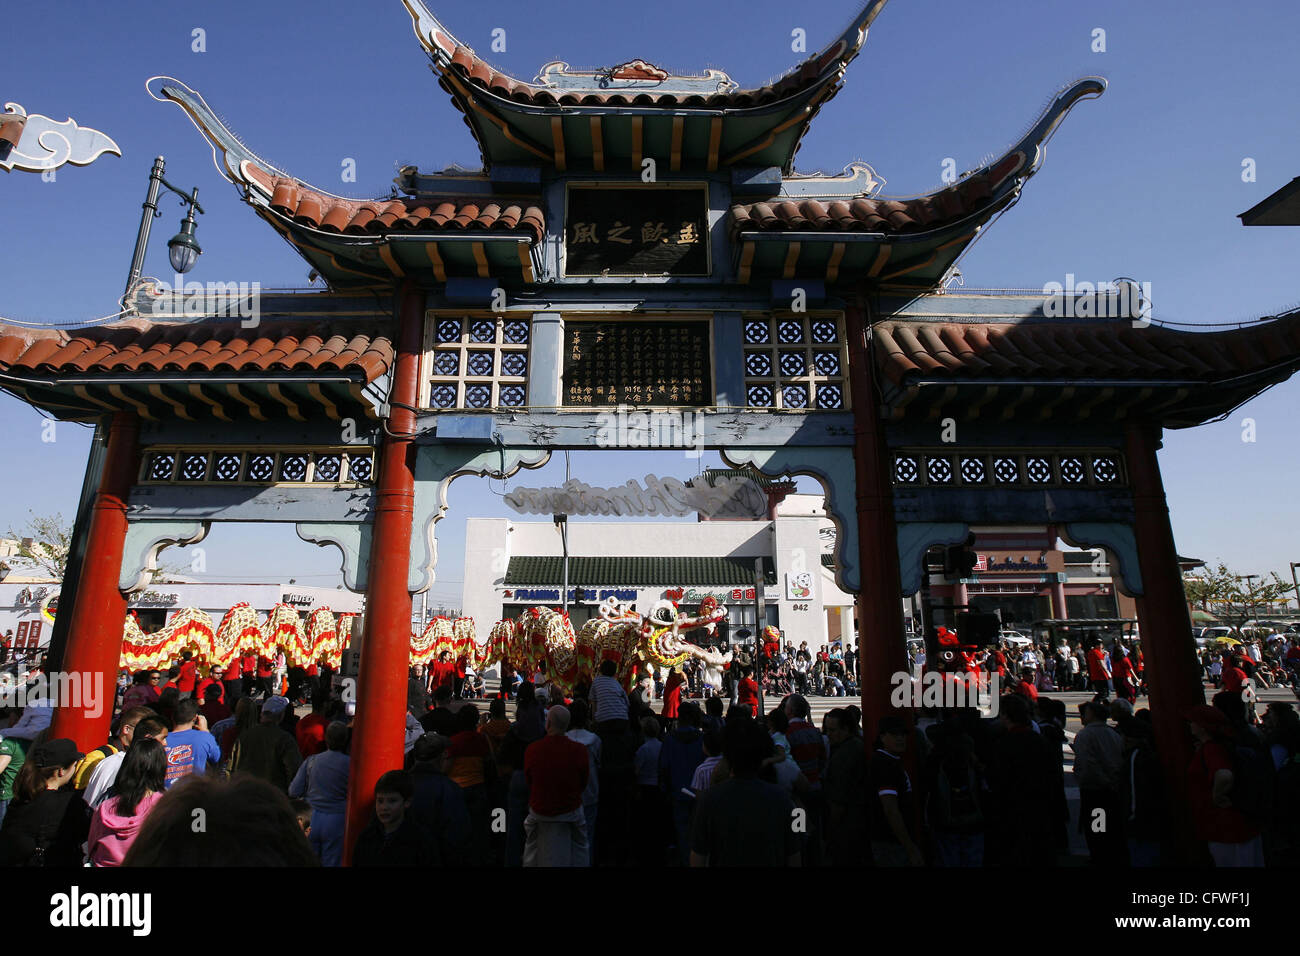 The Chinese New Year "Golden Dragon Parade," in the streets of Chinatown in Los Angeles. (Photo by Ringo H.W. Chiu) Stock Photo